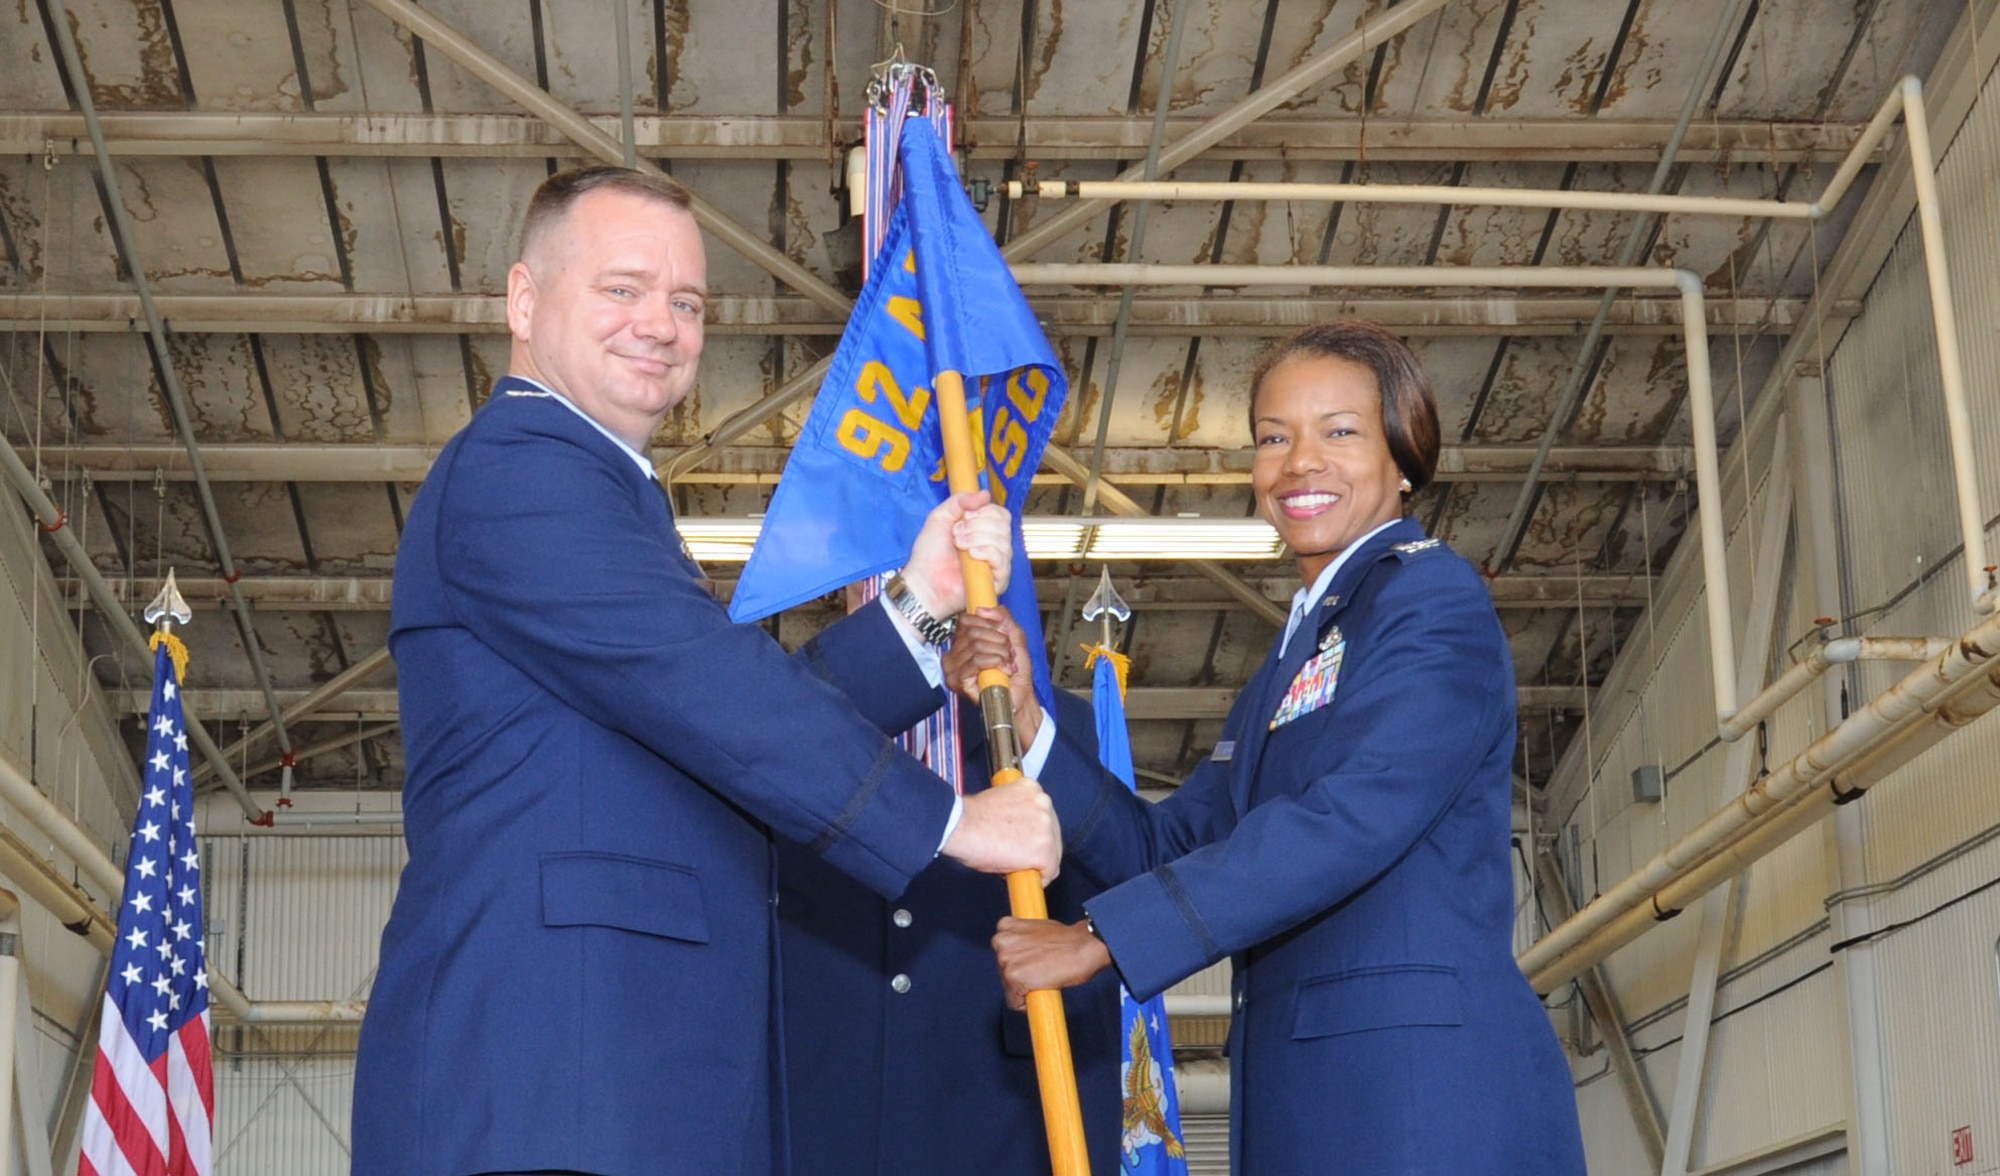 Col. Brian McDaniel, 92nd Air Refueling Wing commander, passes the 92nd Mission Support Group guidon to Col. Yvonne Spencer, 92nd MSG commander, during the change of command ceremony July 14, 2016, at Fairchild Air Force Base, Wash. Spencer was previously commander of the 819th RED HORSE Squadron at Malsmstrom AFB, Mont. (U.S. Air Force photo/Senior Airman Sam Fogleman)